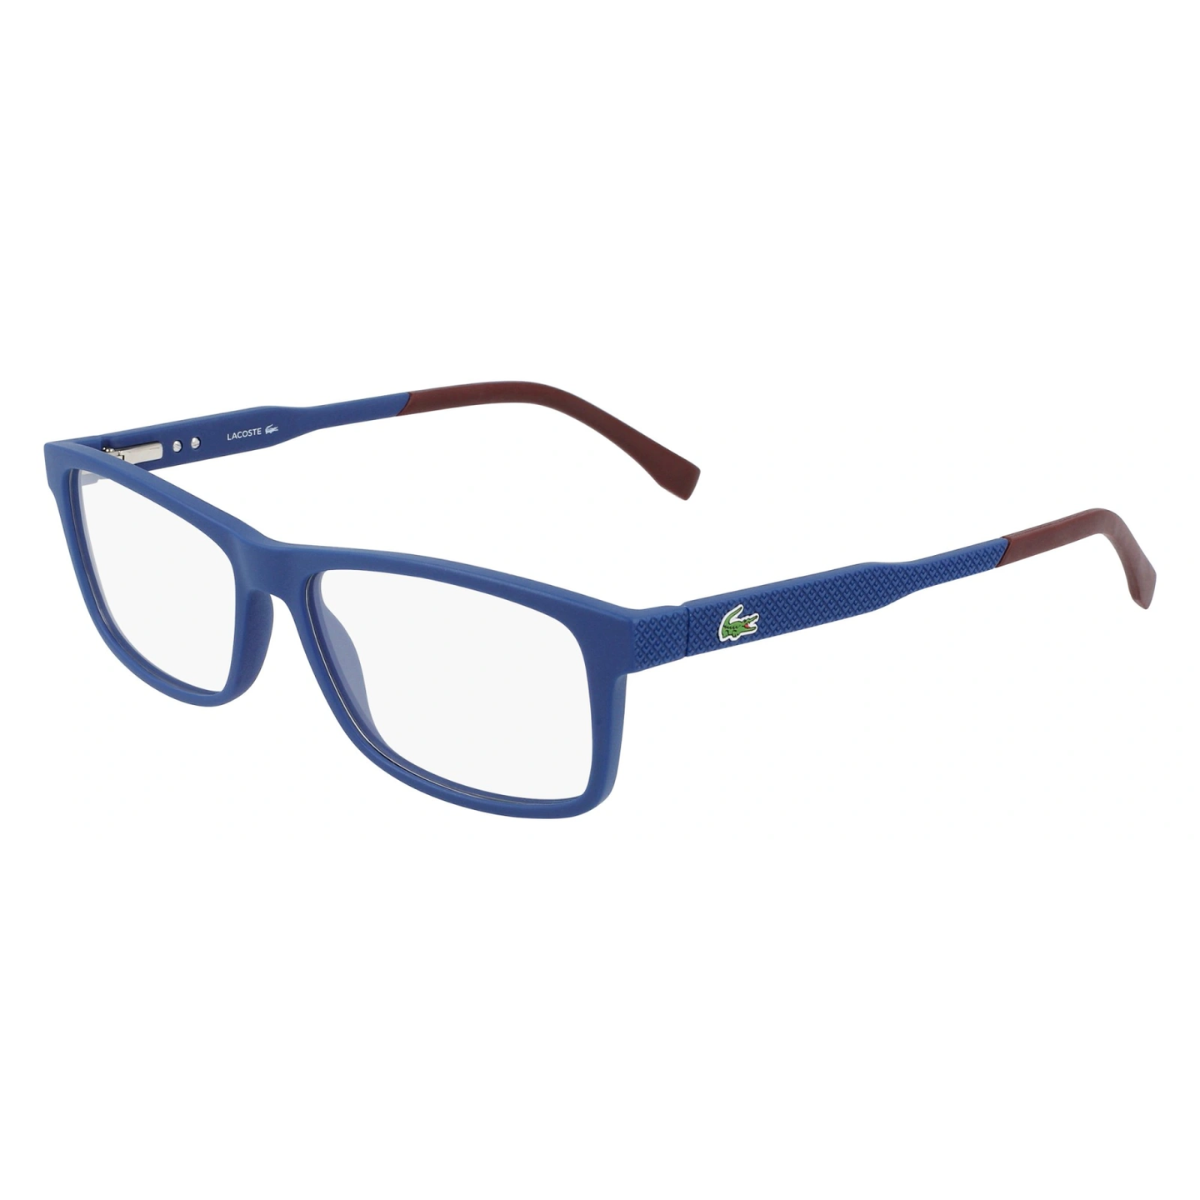 Lacoste 2876 424 Frame